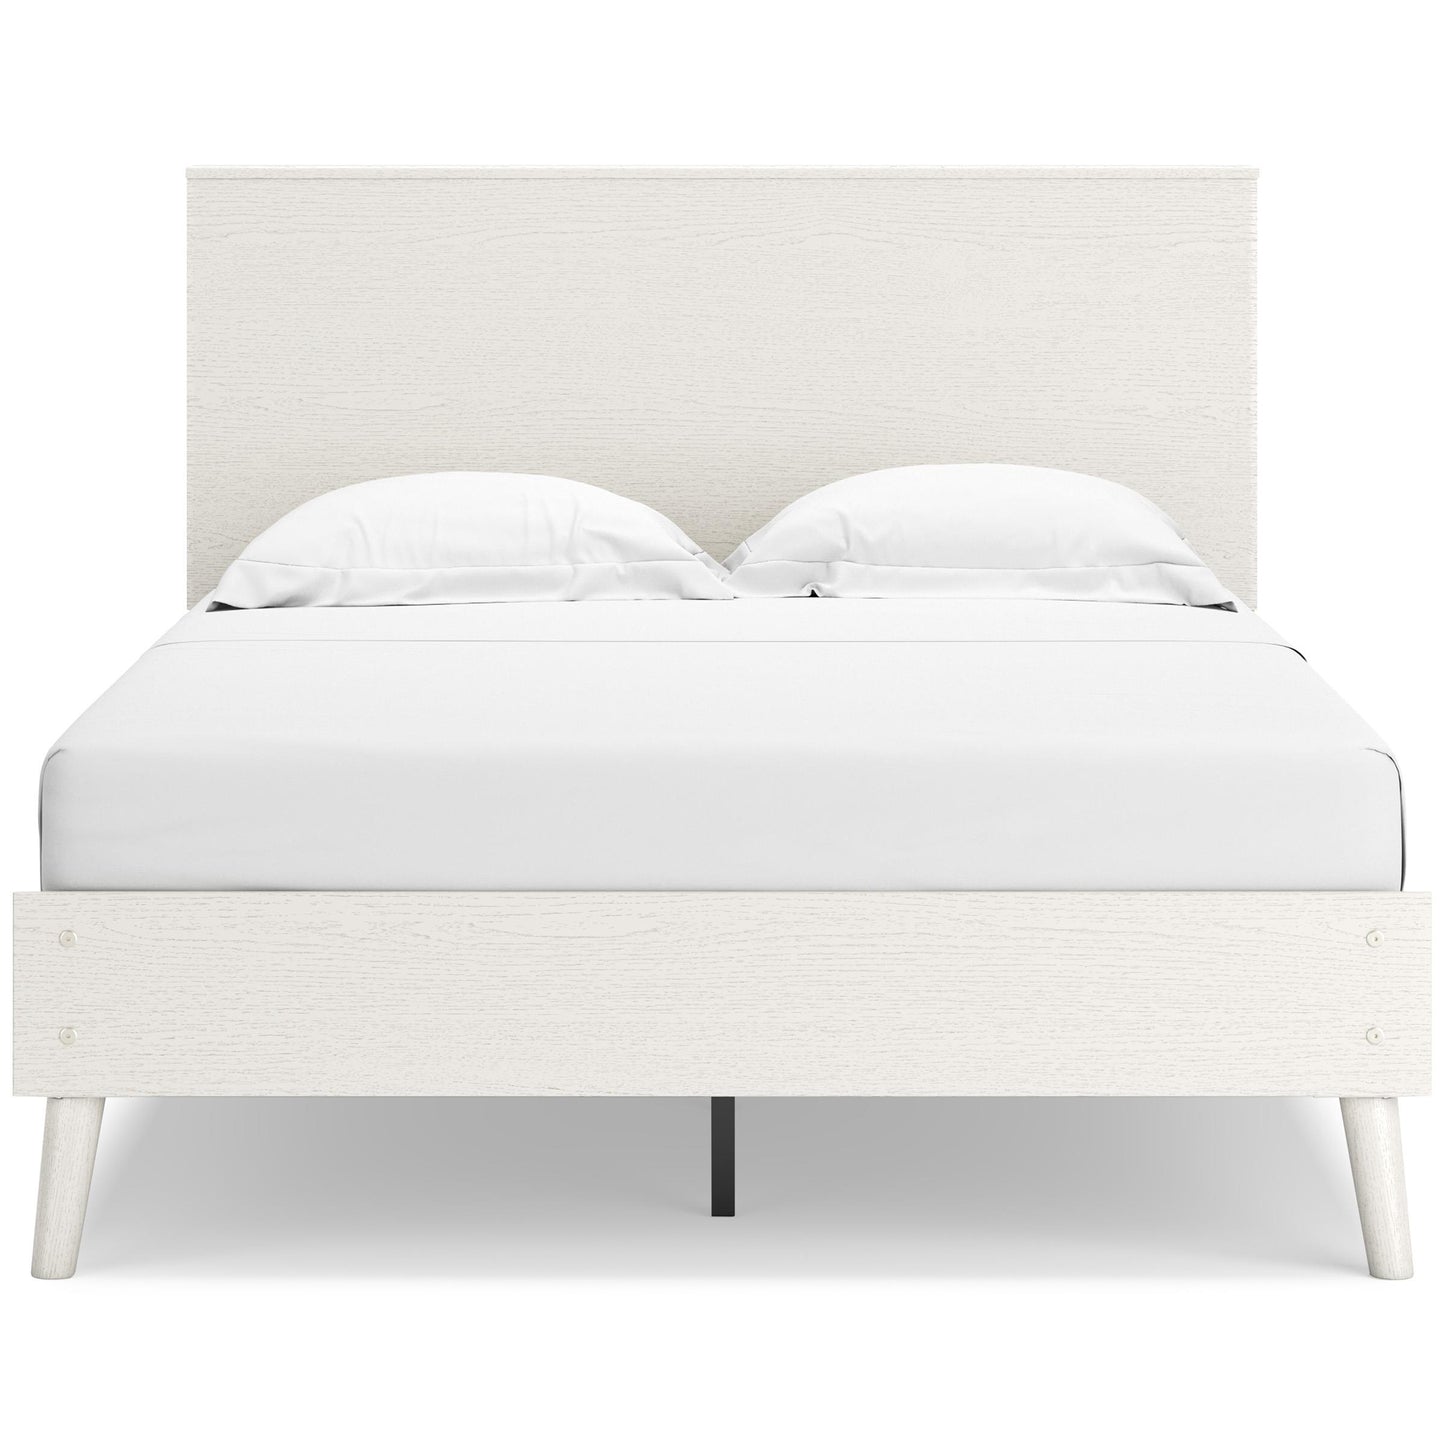 Signature Design by Ashley Kids Beds Bed EB1024-164/EB1024-112 IMAGE 2